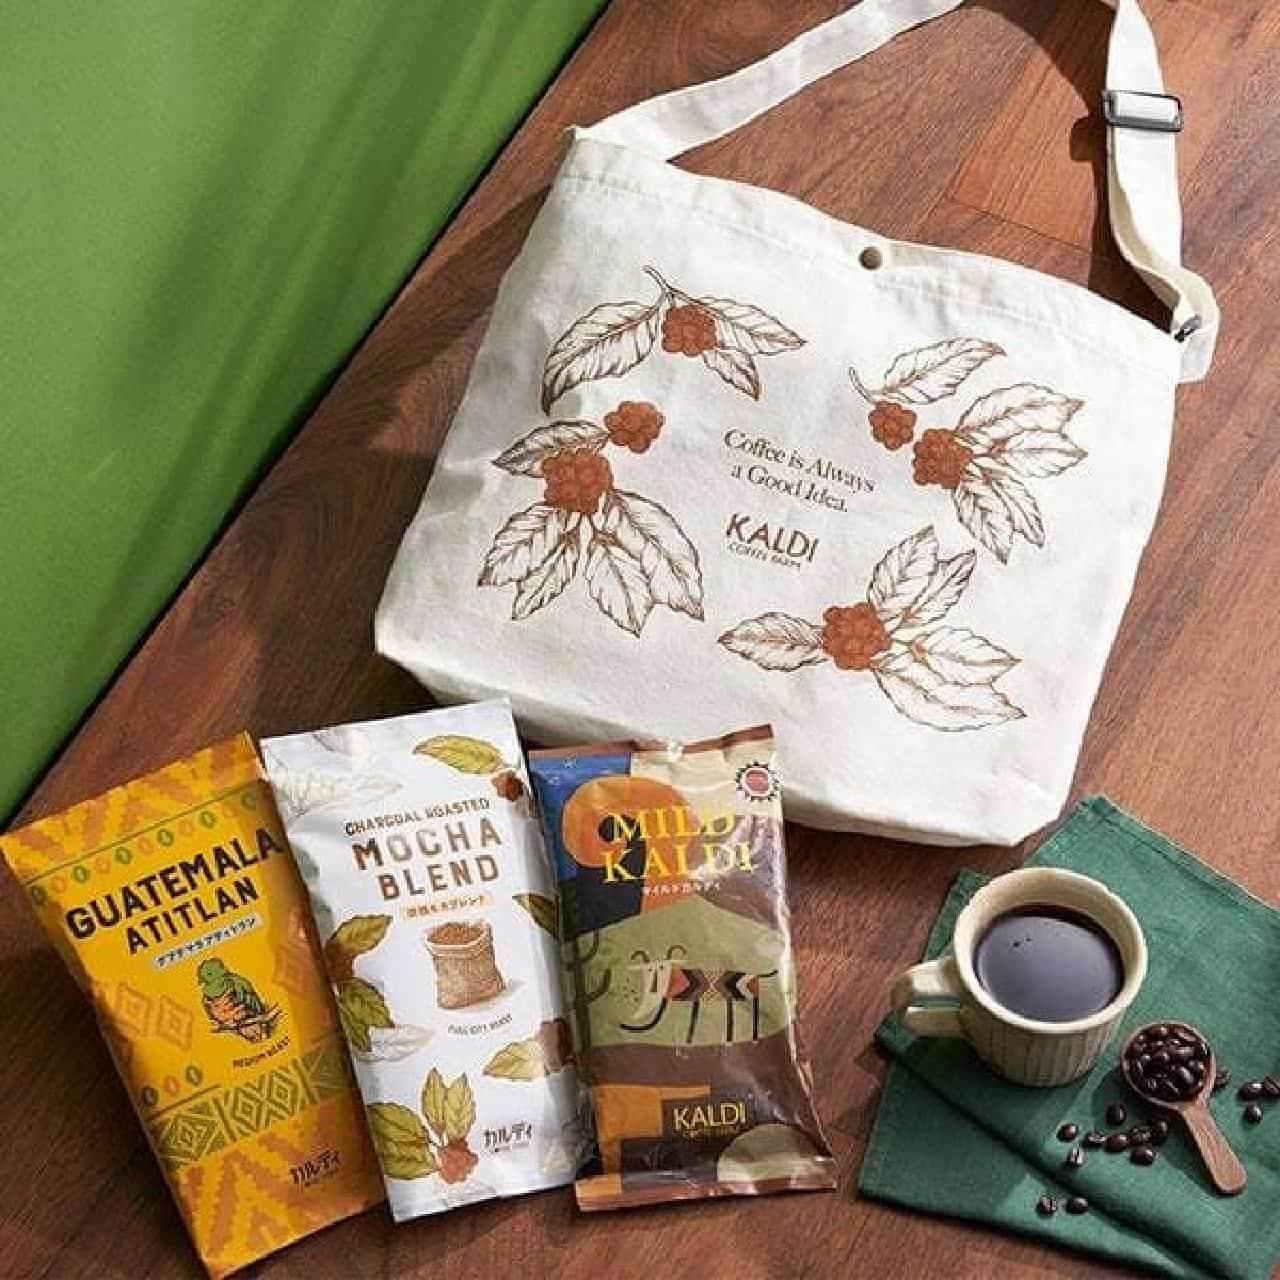 KALDI "Coffee Day Bag" Set of 3 types of coffee beans and one-shoulder tote